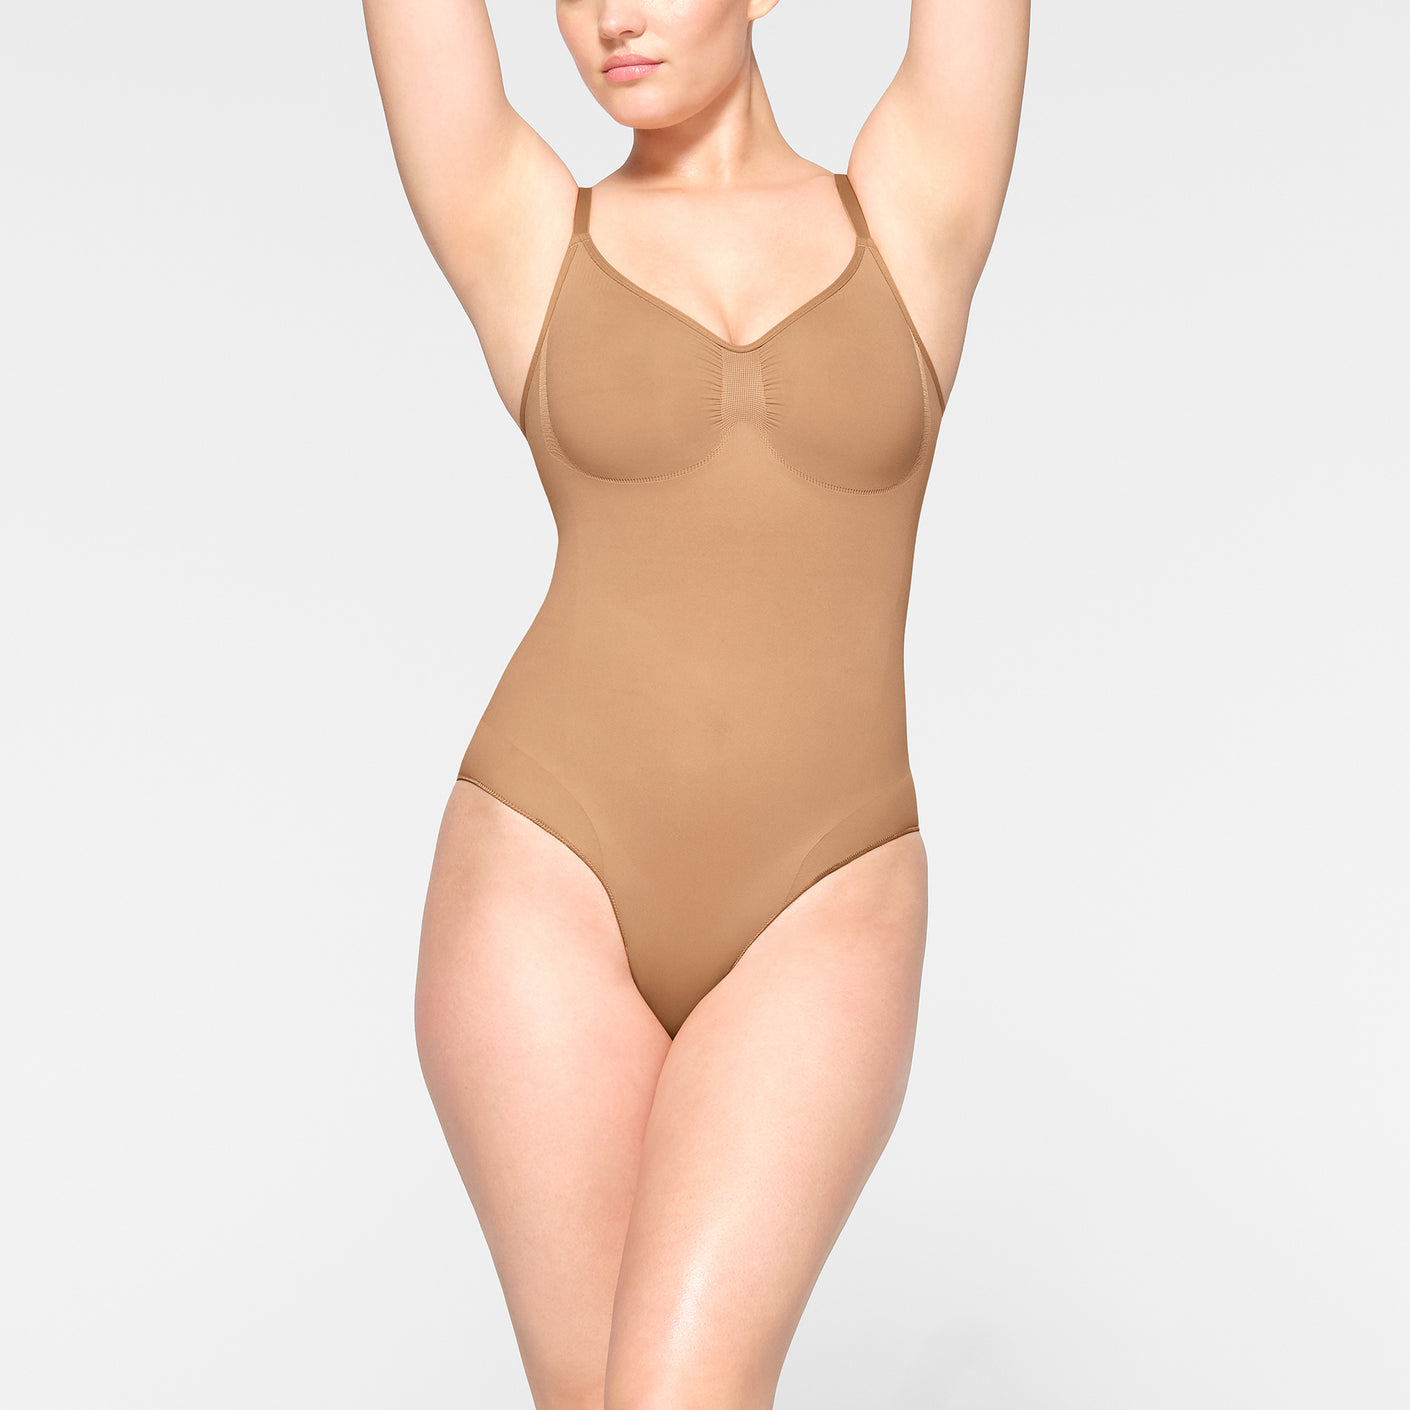 SKIMS - SKIMS new sculpting superhero — the Power Mesh Bodysuit. Launching  tomorrow, Tuesday July 21 at 9AM PT / 12PM ET in 5 colors and in sizes XXS  - 4X. Join